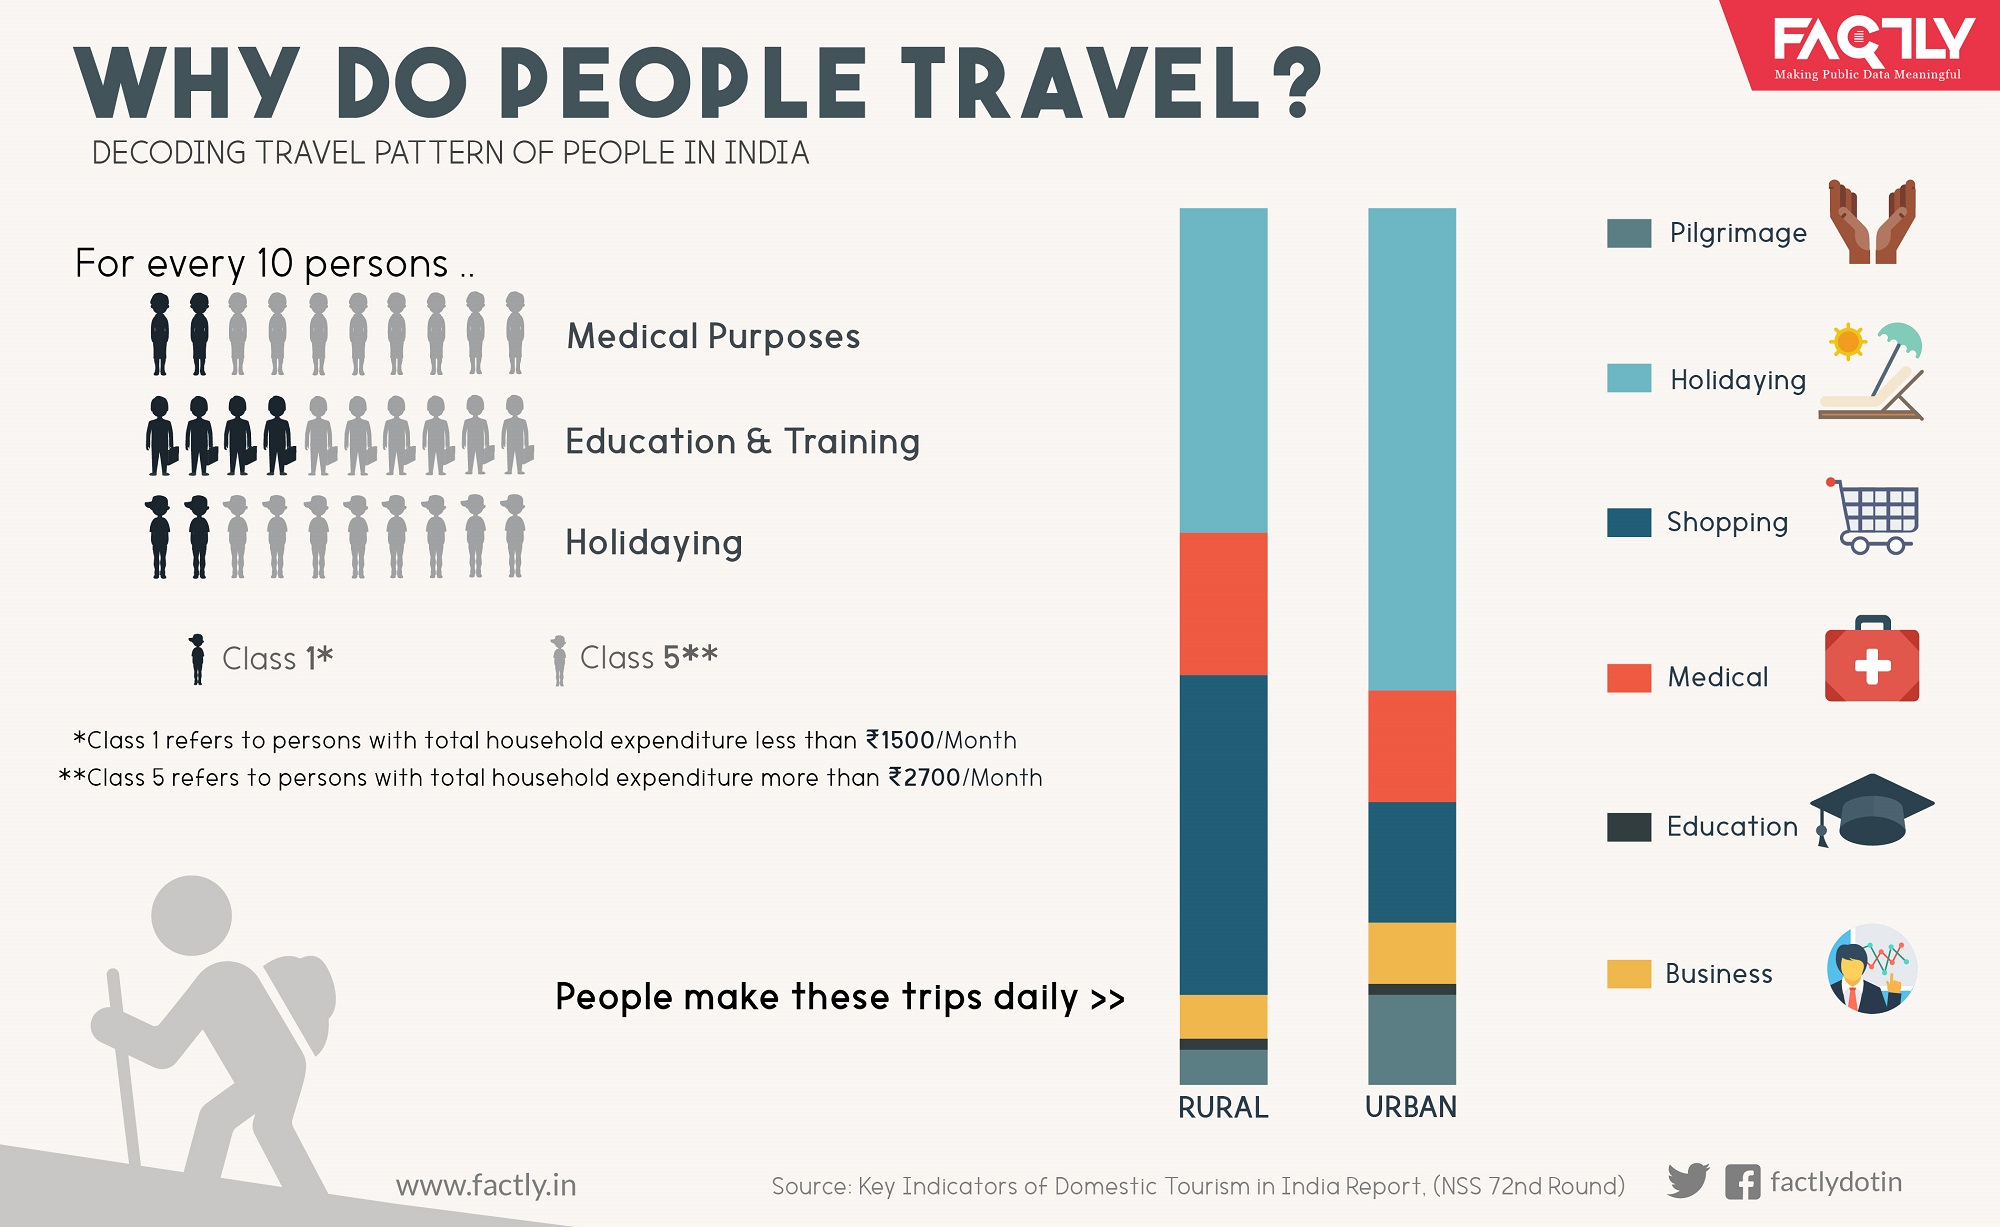 Why do people need people. Why do people Travel. Why people Travel. Reasons why people Travel. Reasons to Travel.